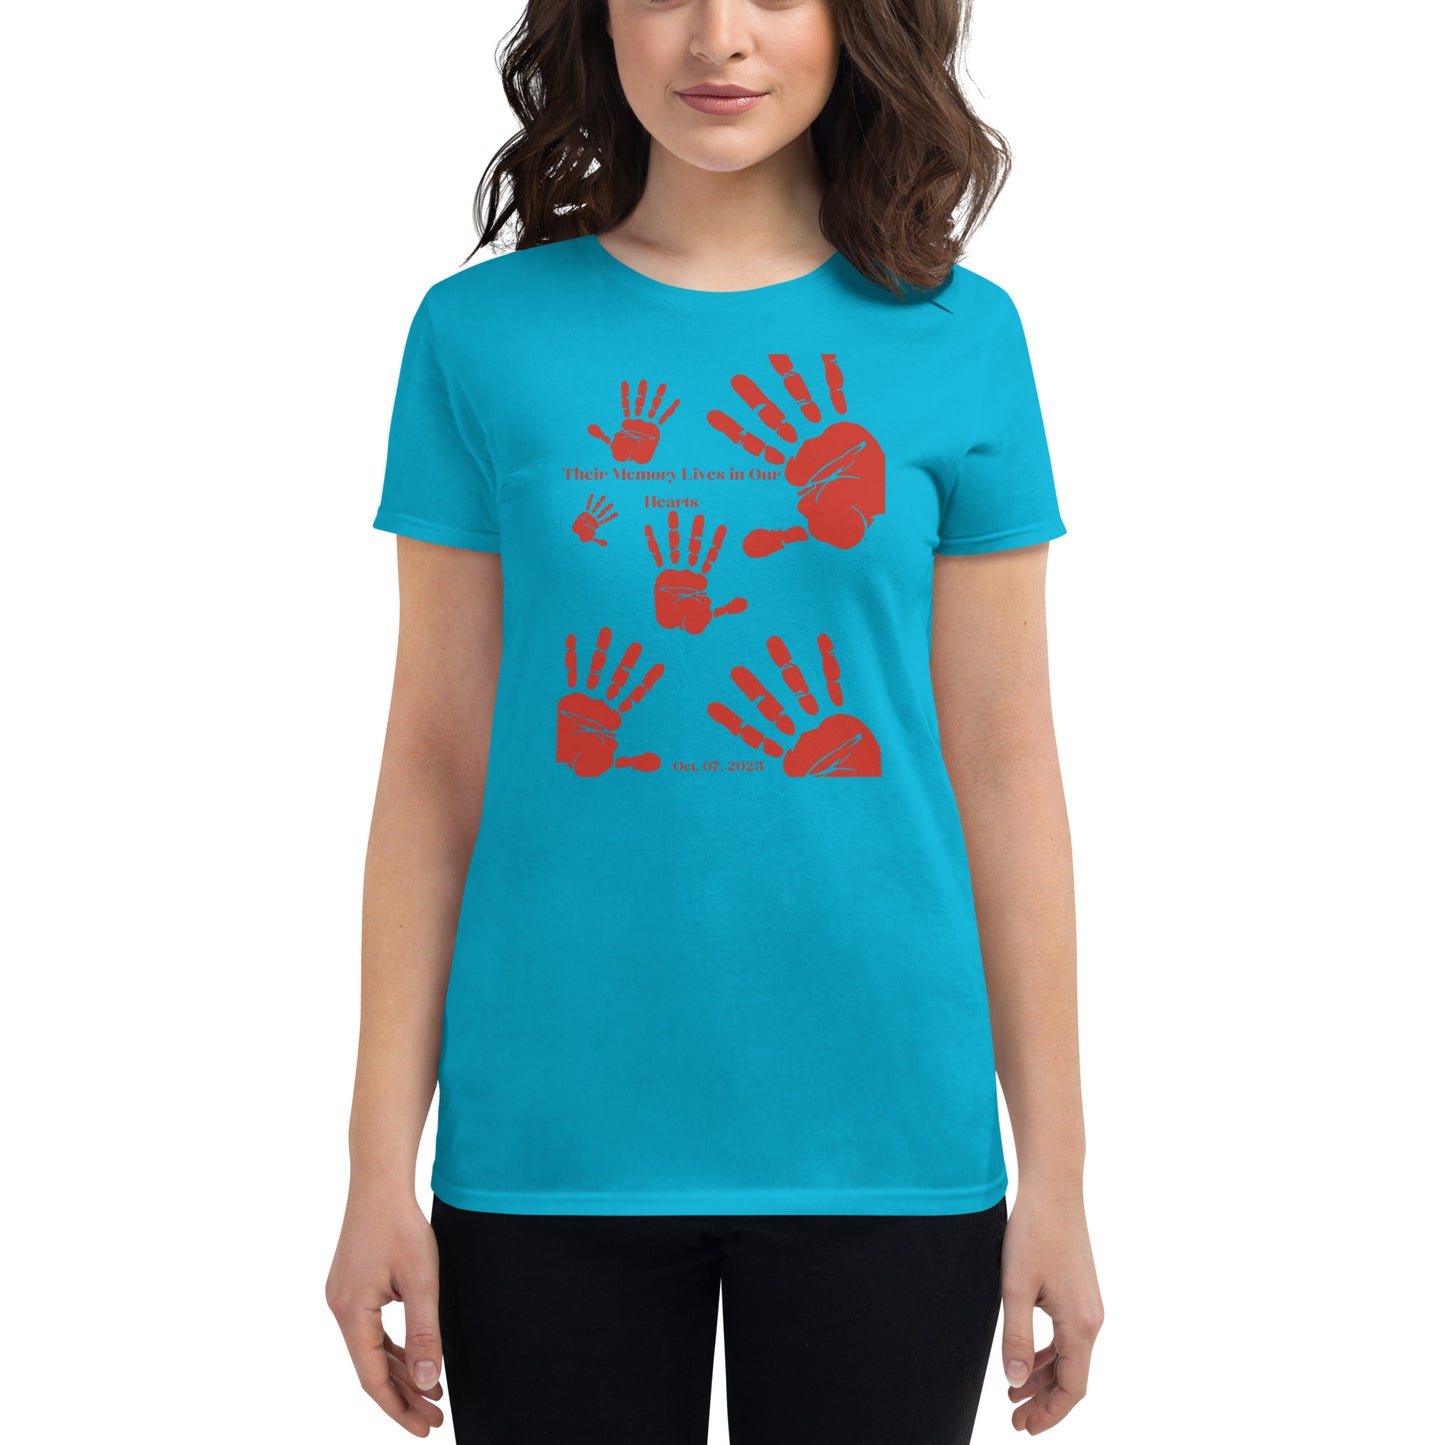 Their memory lives in our hearts - Women's short sleeve t-shirt (5 colors)